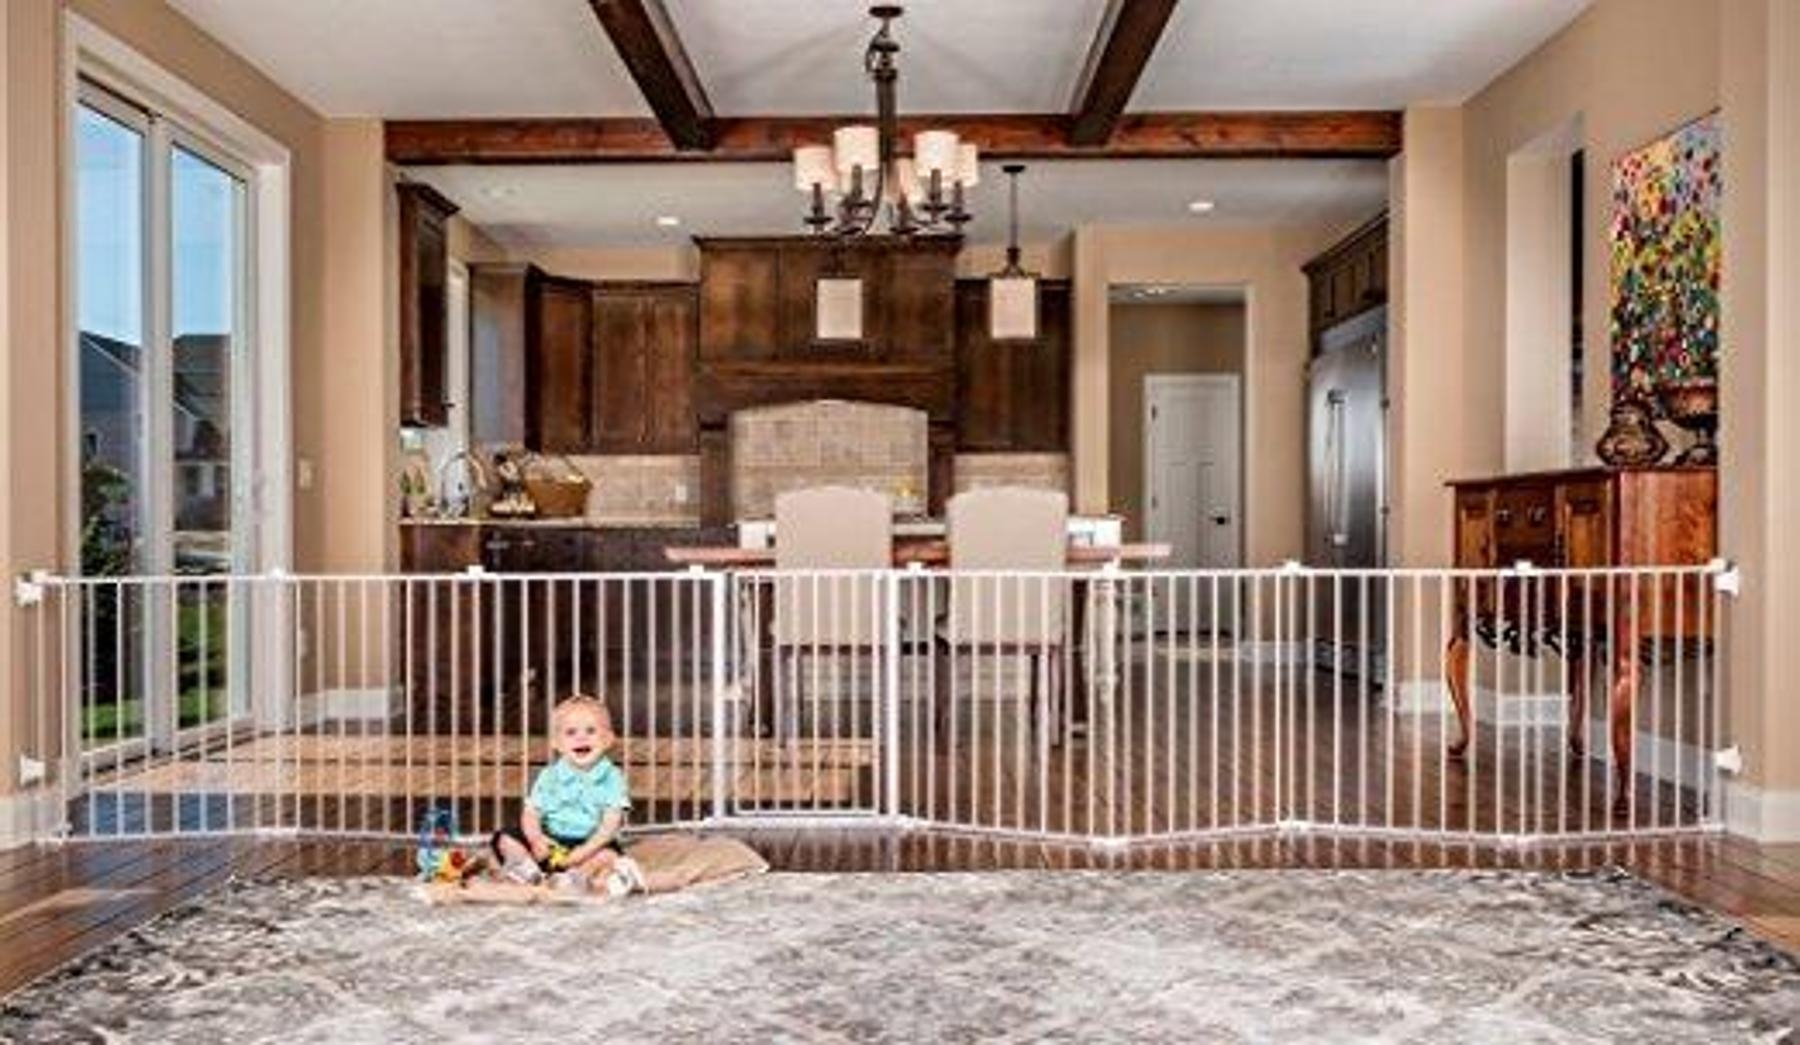 Extra Wide Baby Gate - VisualHunt